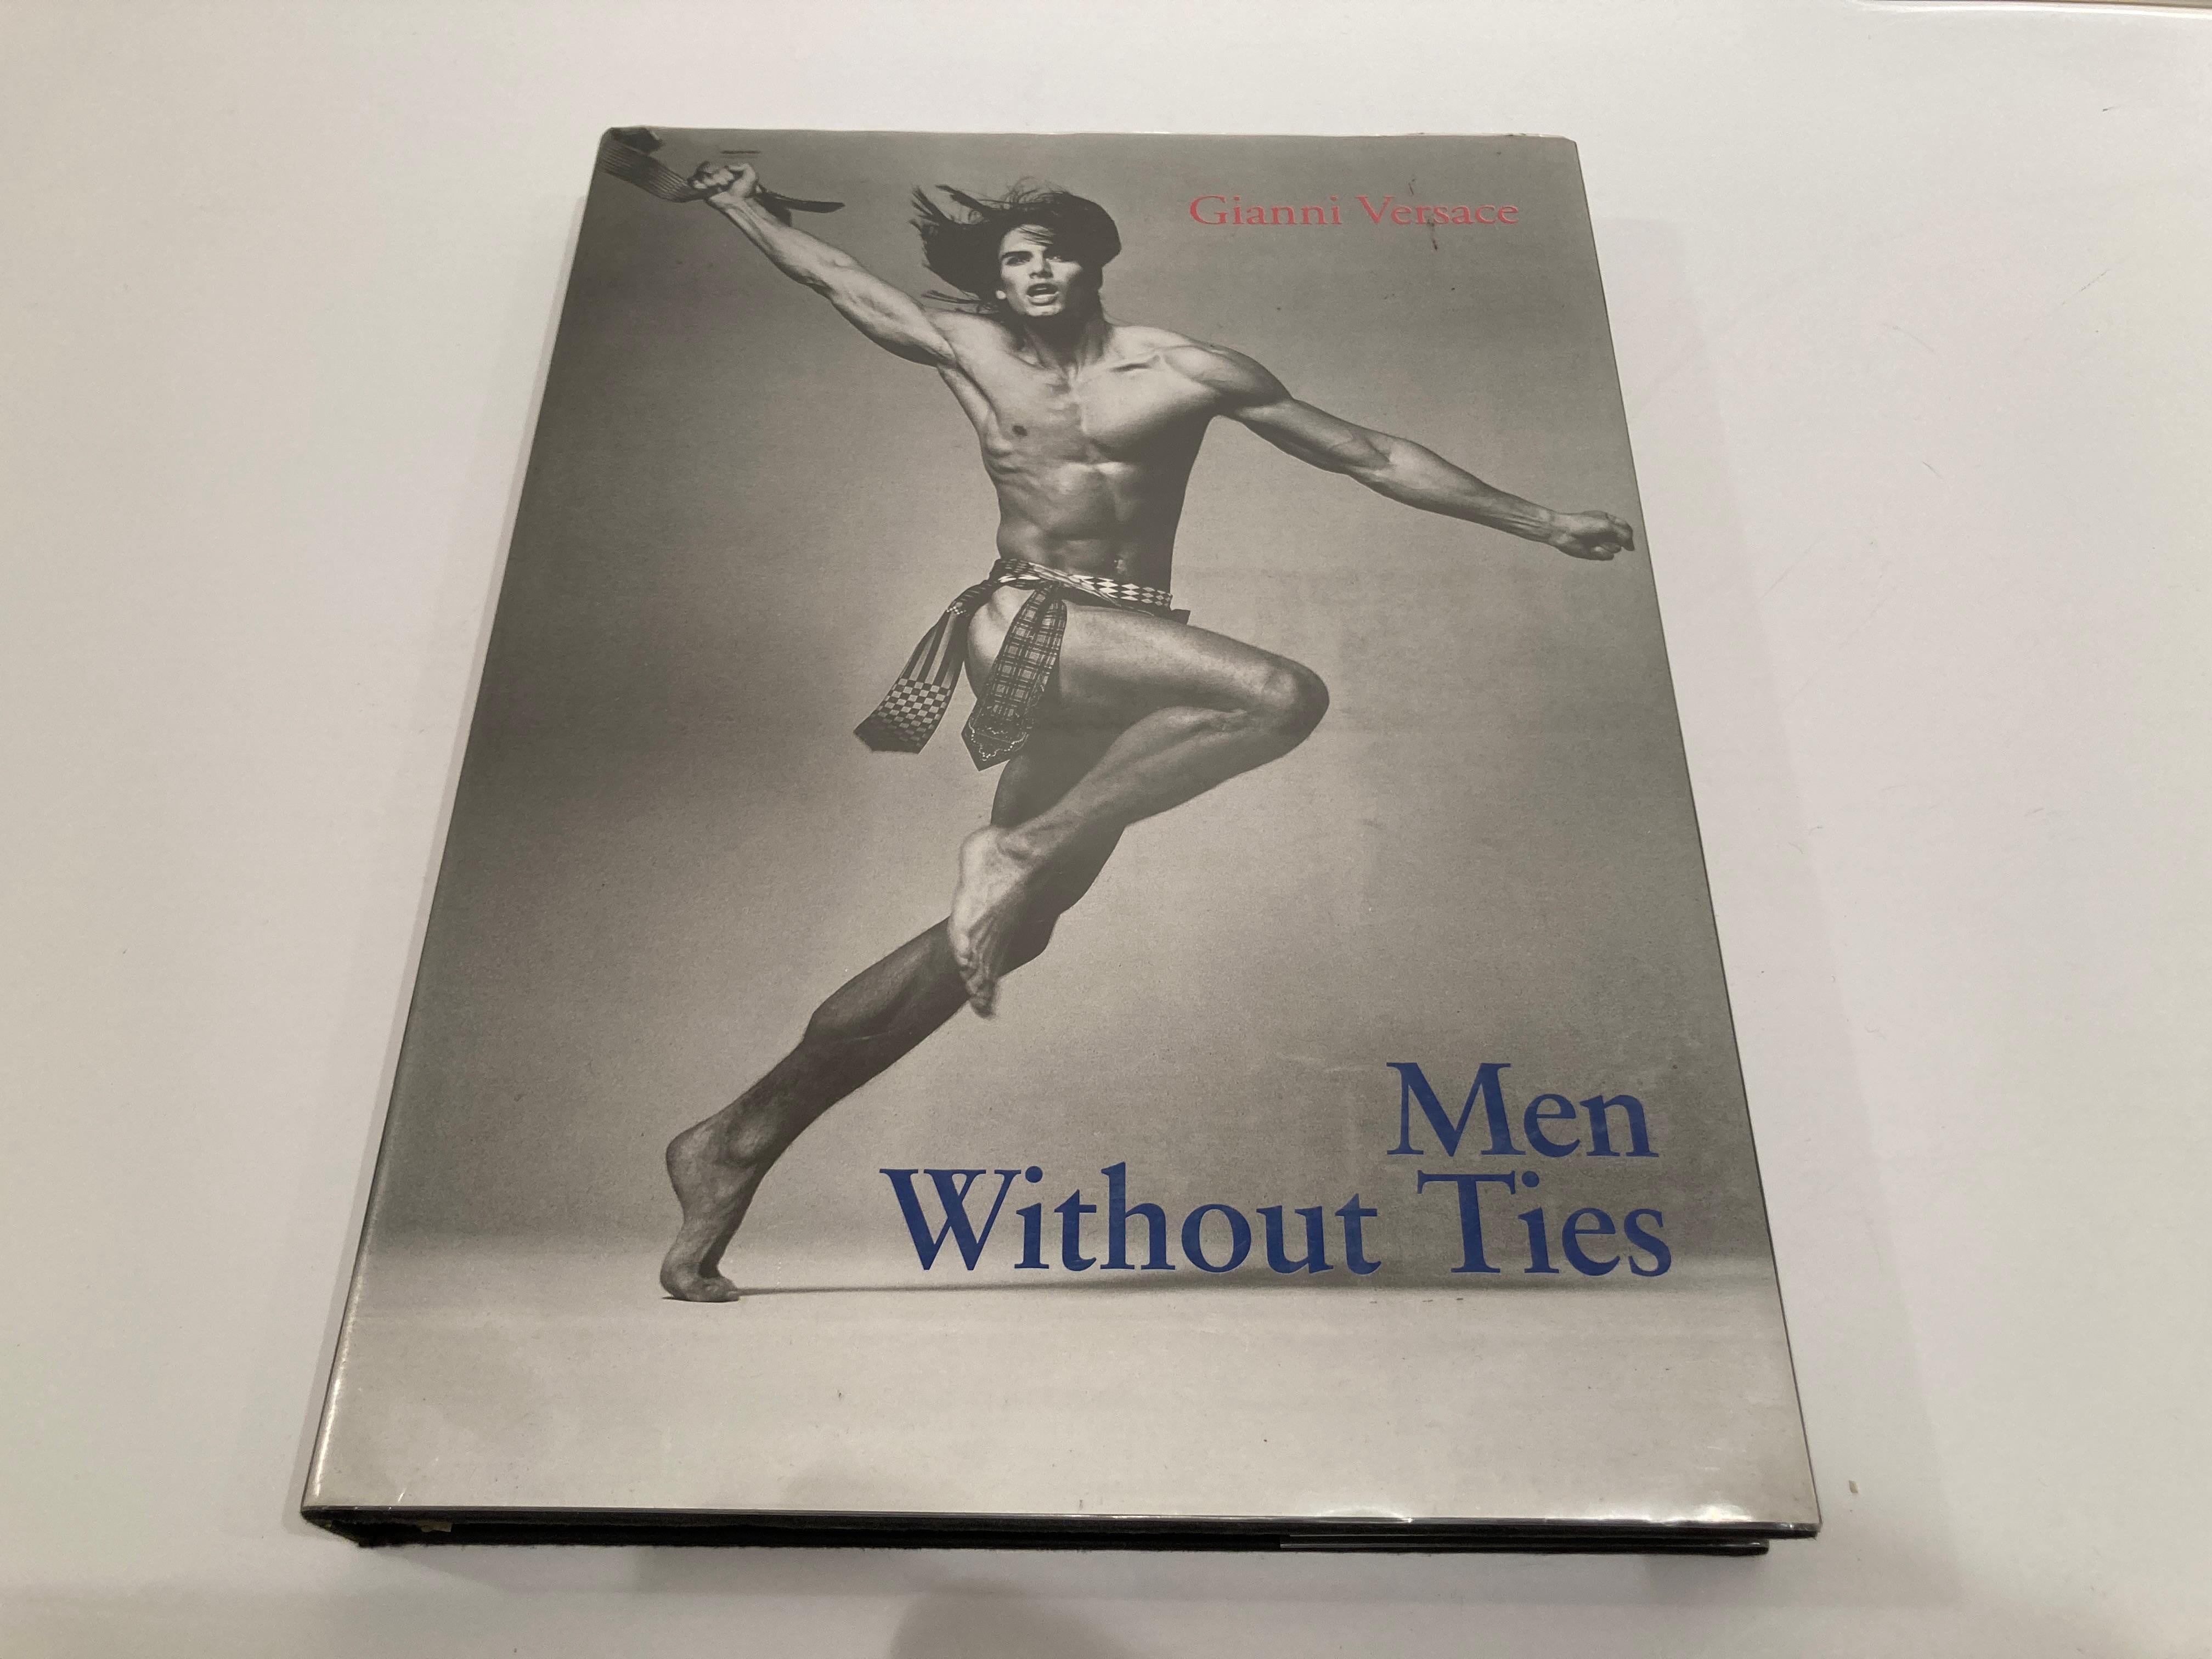 Men Without Ties Texts by Barry Hannah, Richard Martin, Bob Wilson, Gianni Versace.
Large beautiful hardcover book, with original slipcover.
Inscription in Italian on the 1st page in red, probably gifted to the precedent owner.
Published